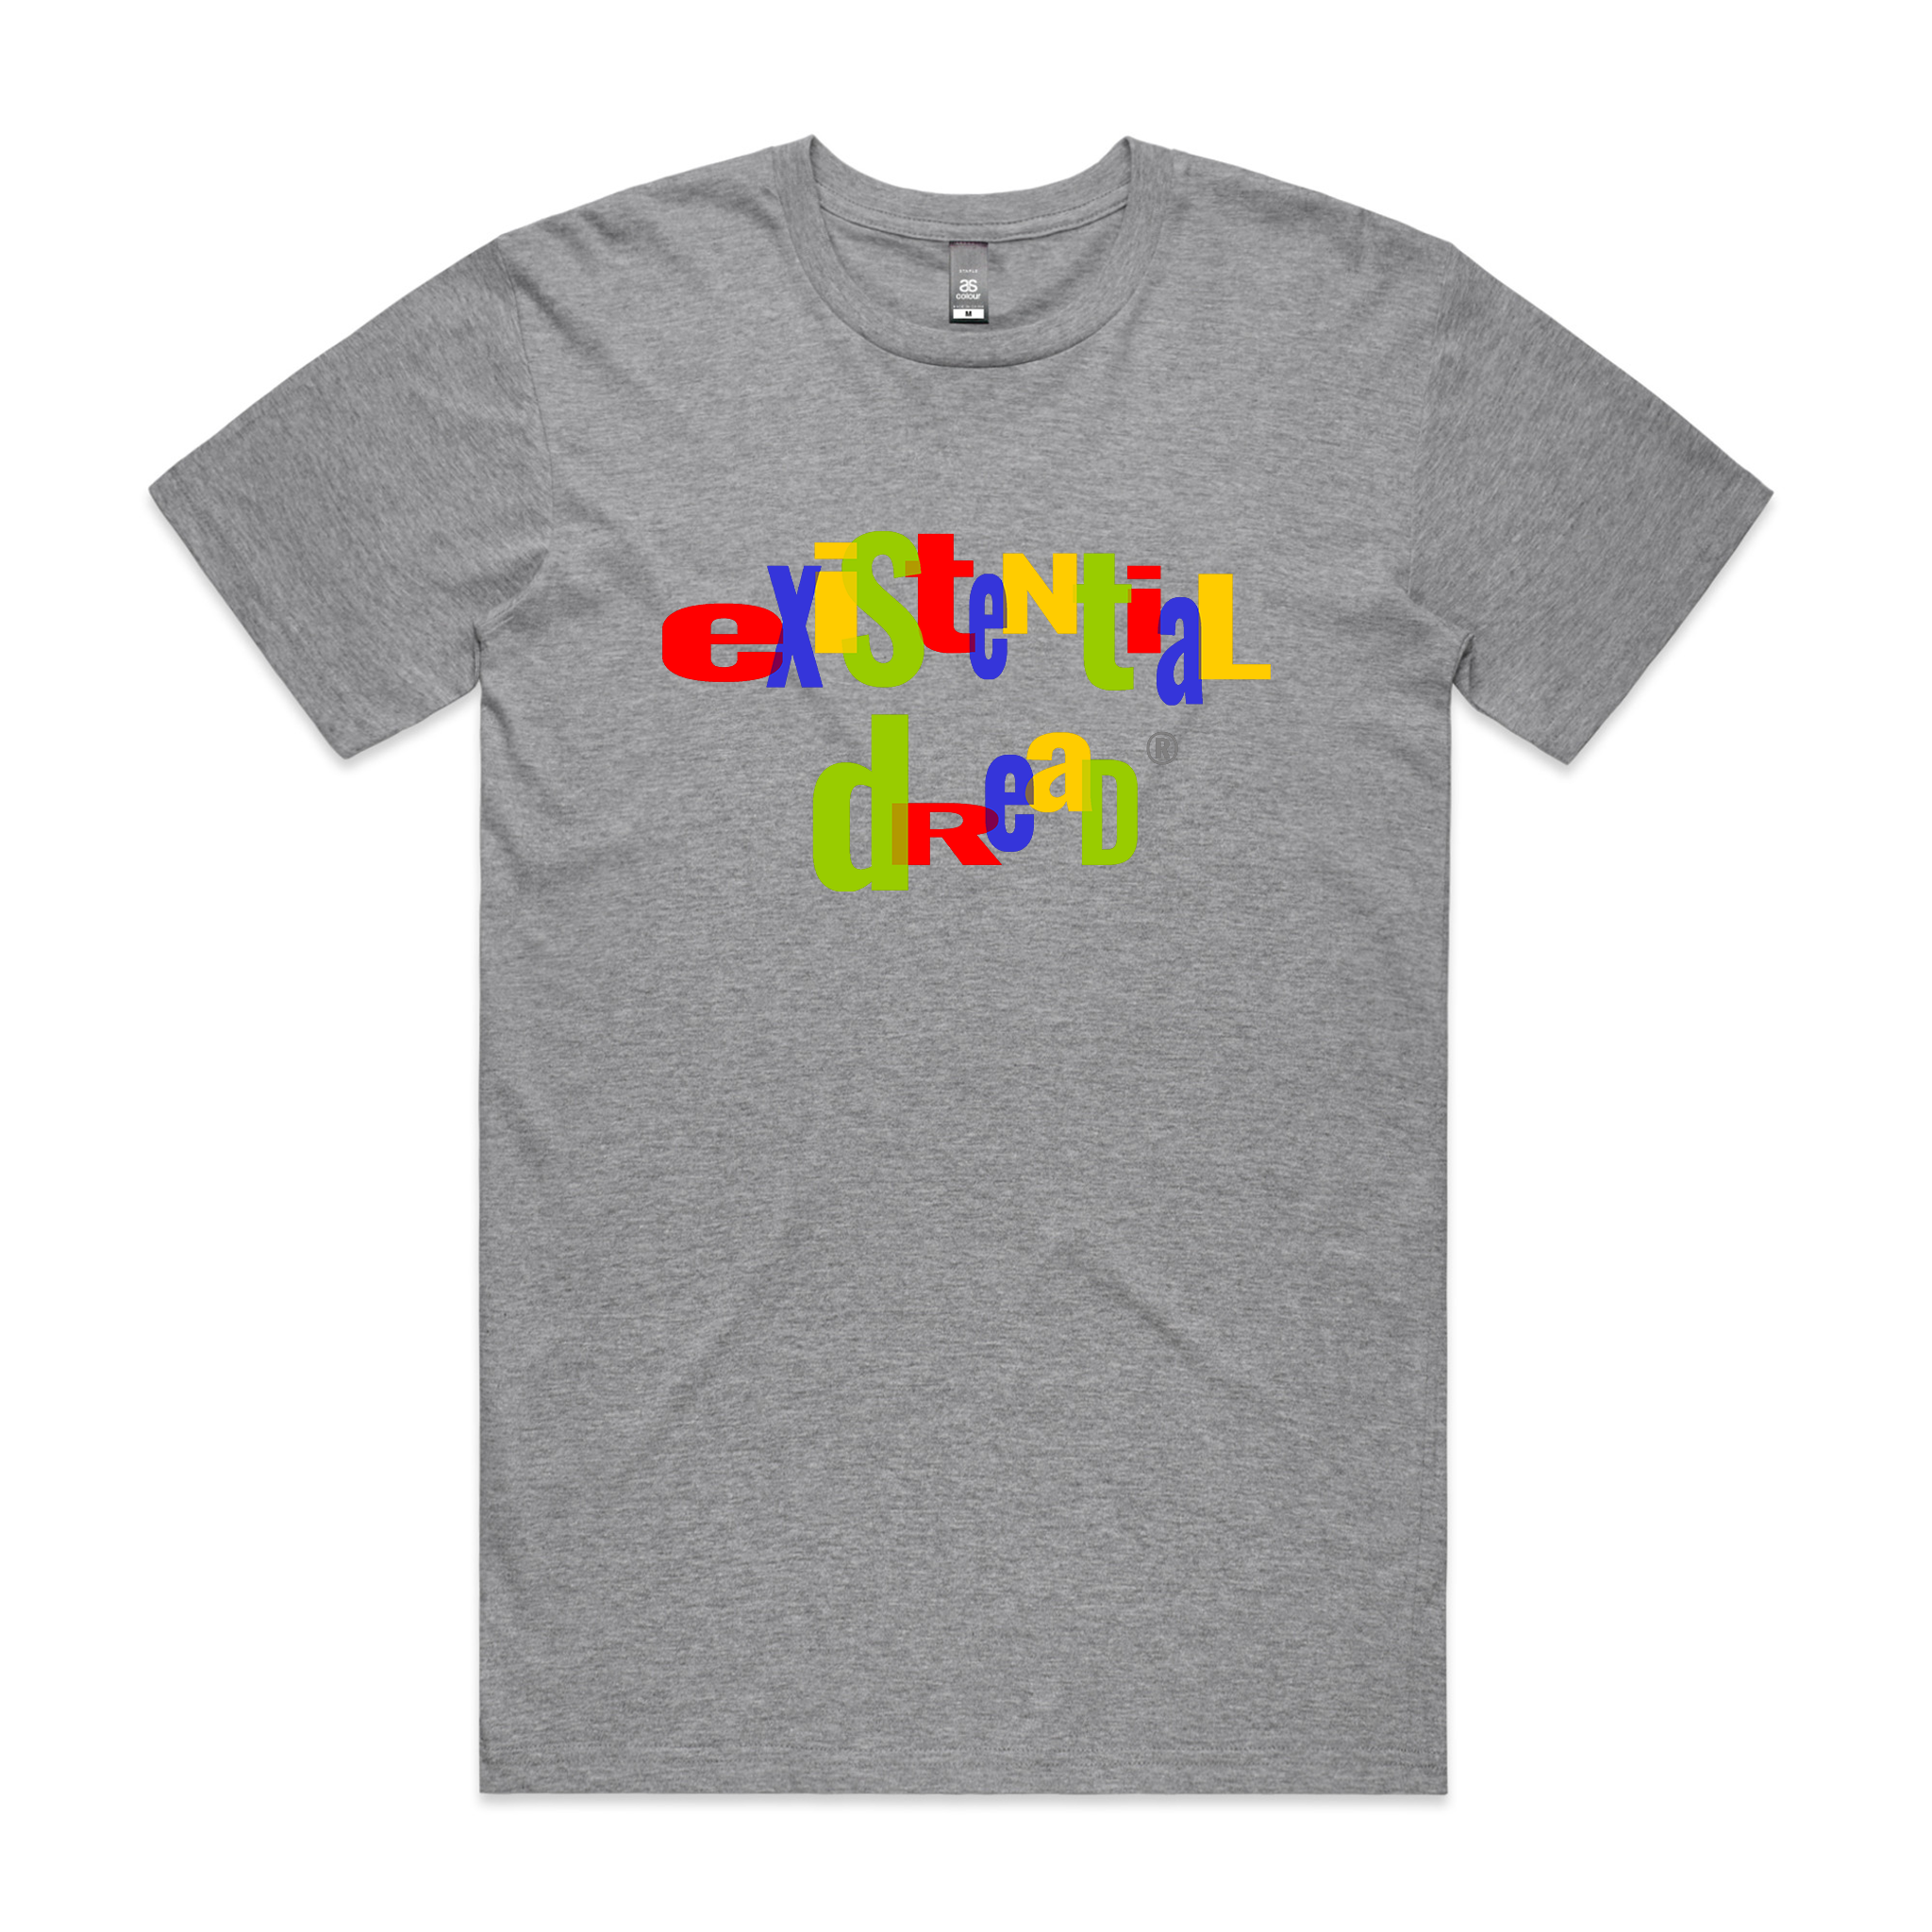 Existential Dread Tee